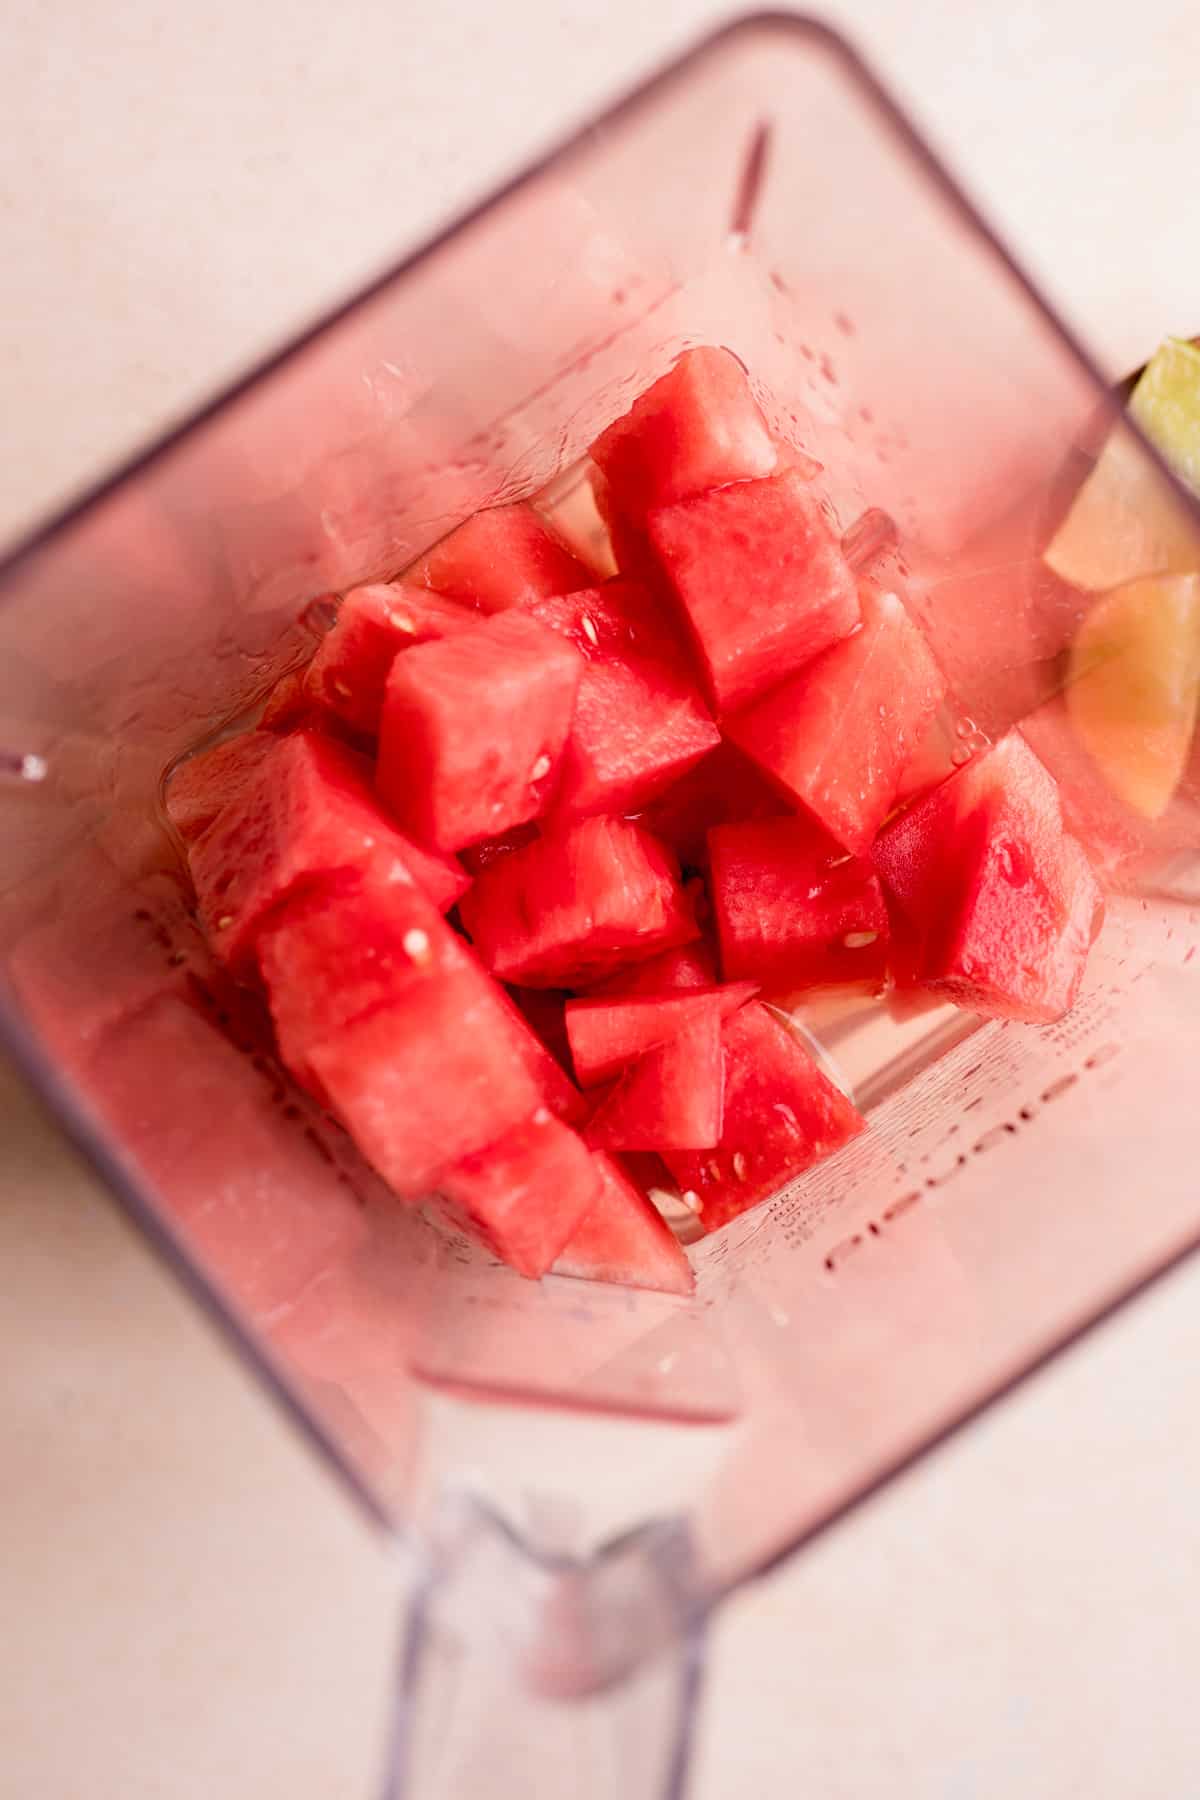 Watermelon added to a blender.